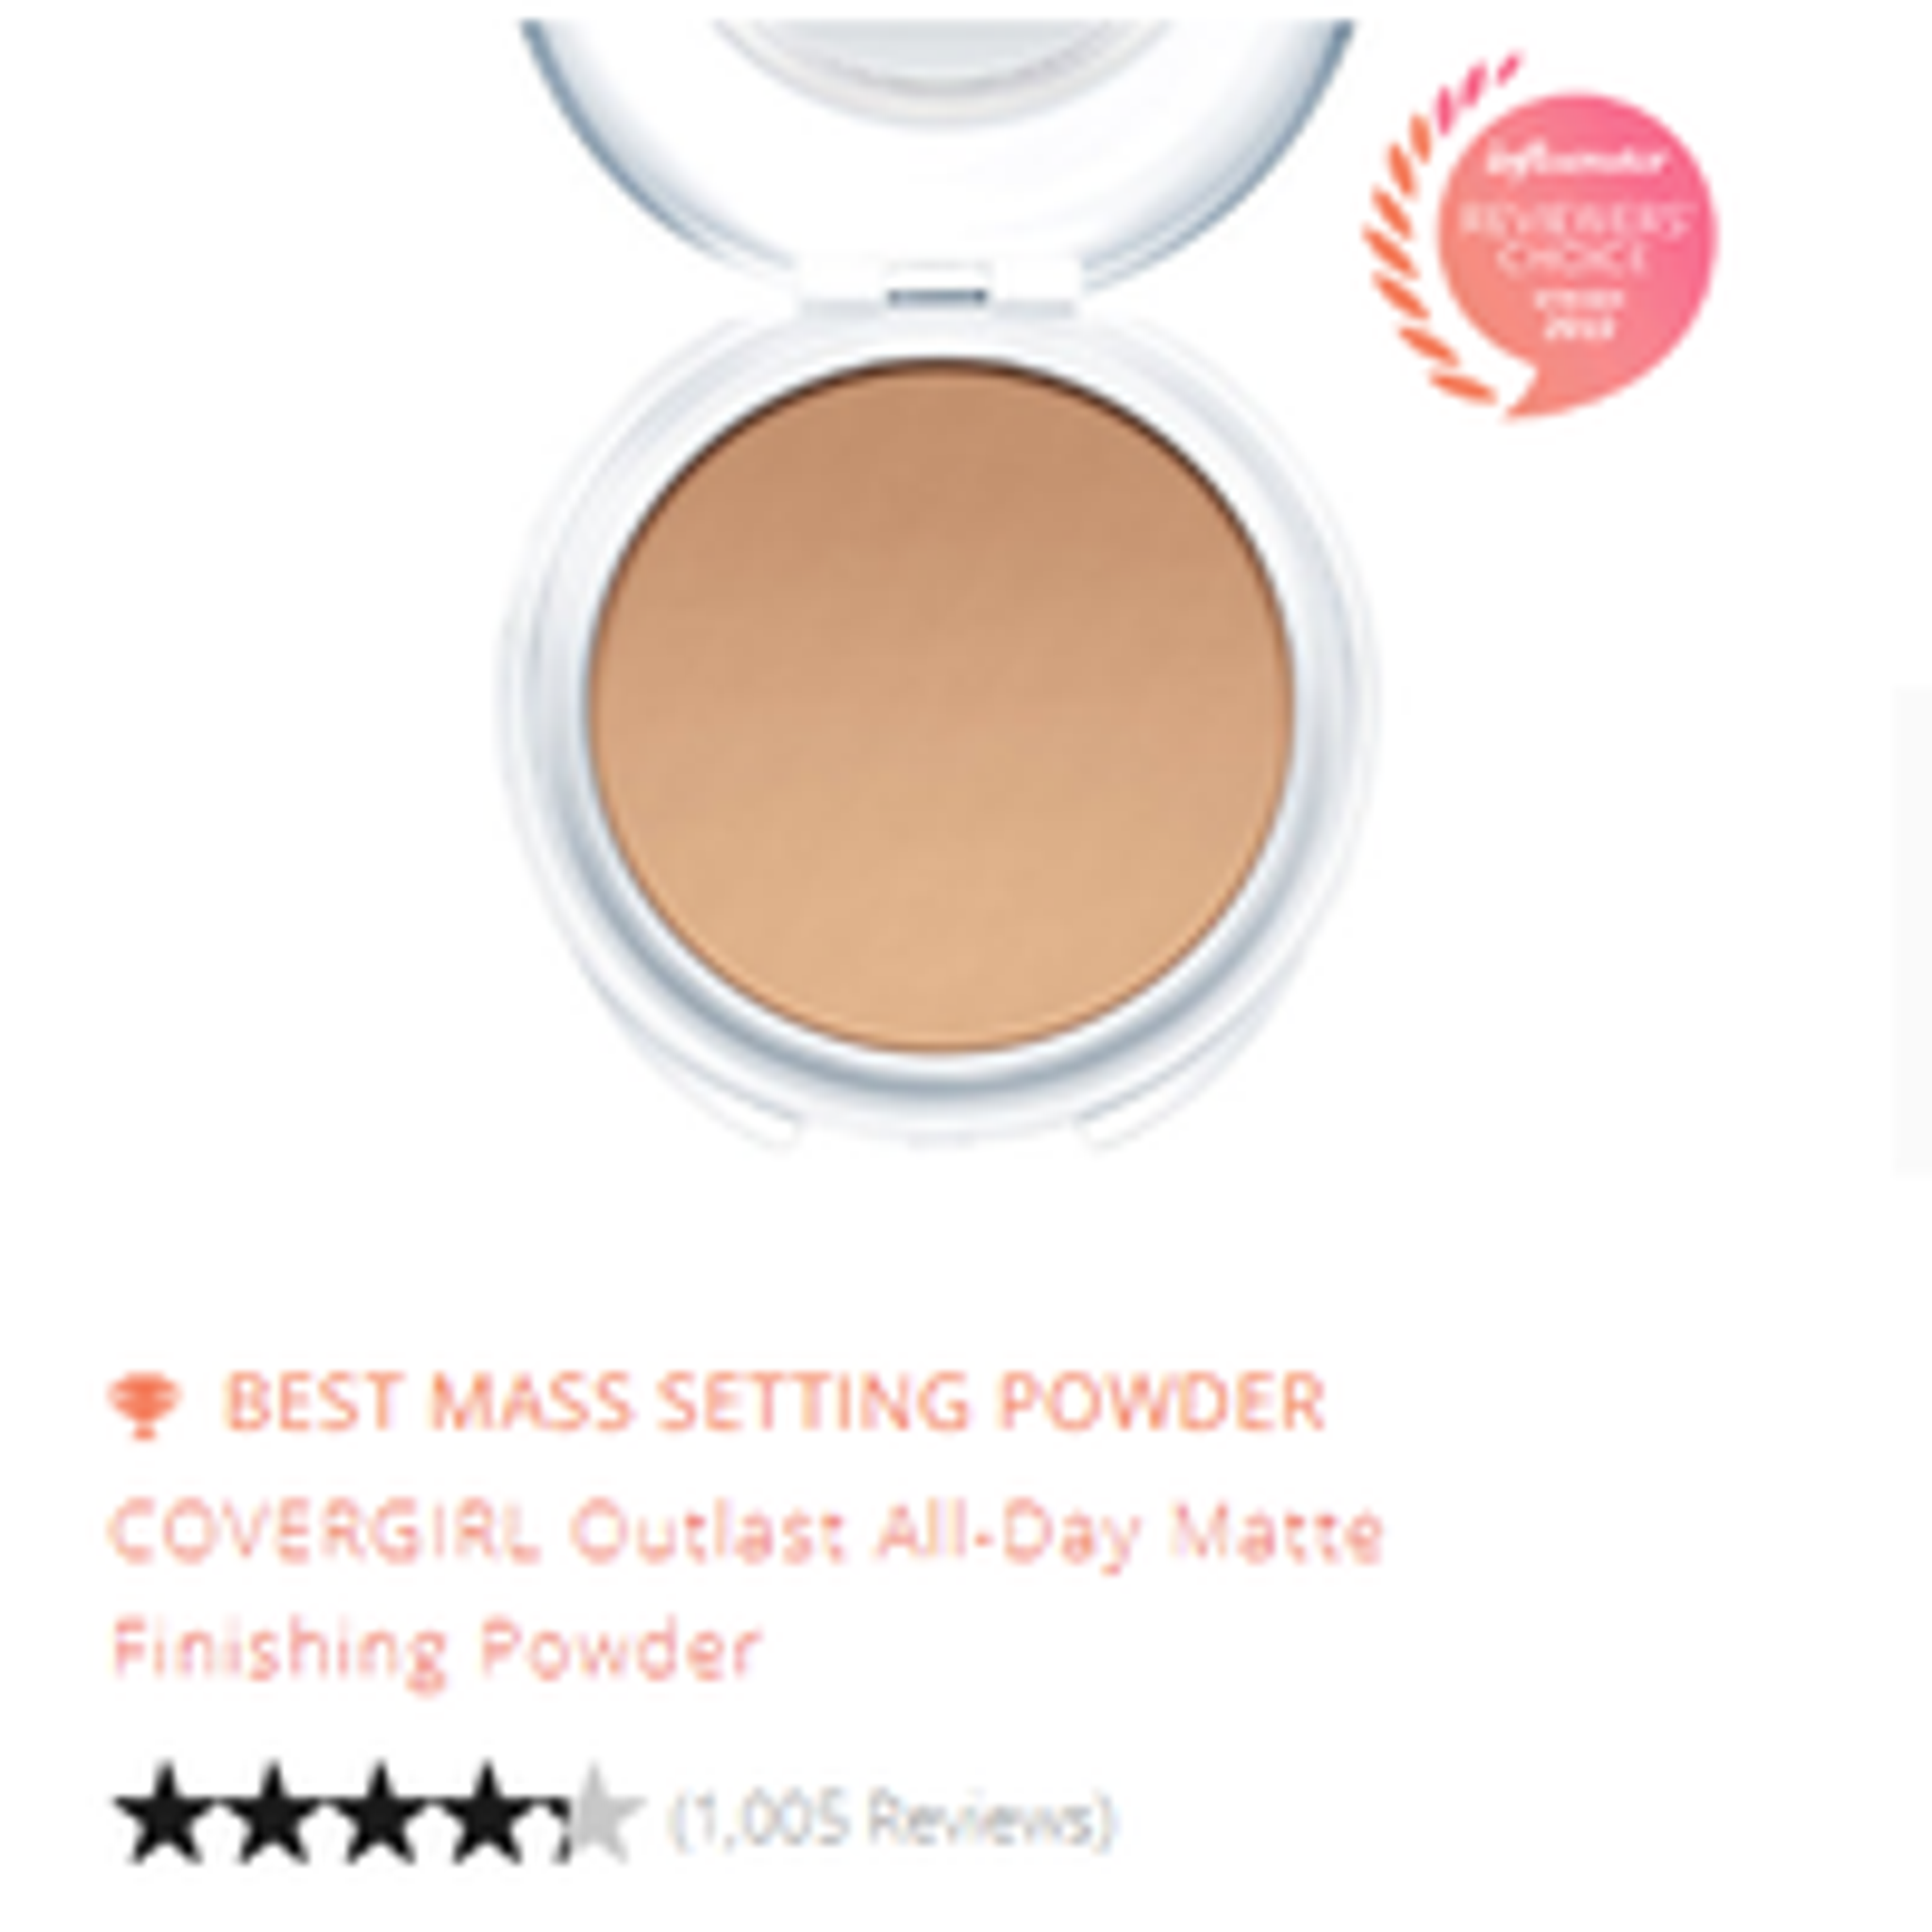 covergirl_outlast_powder.png